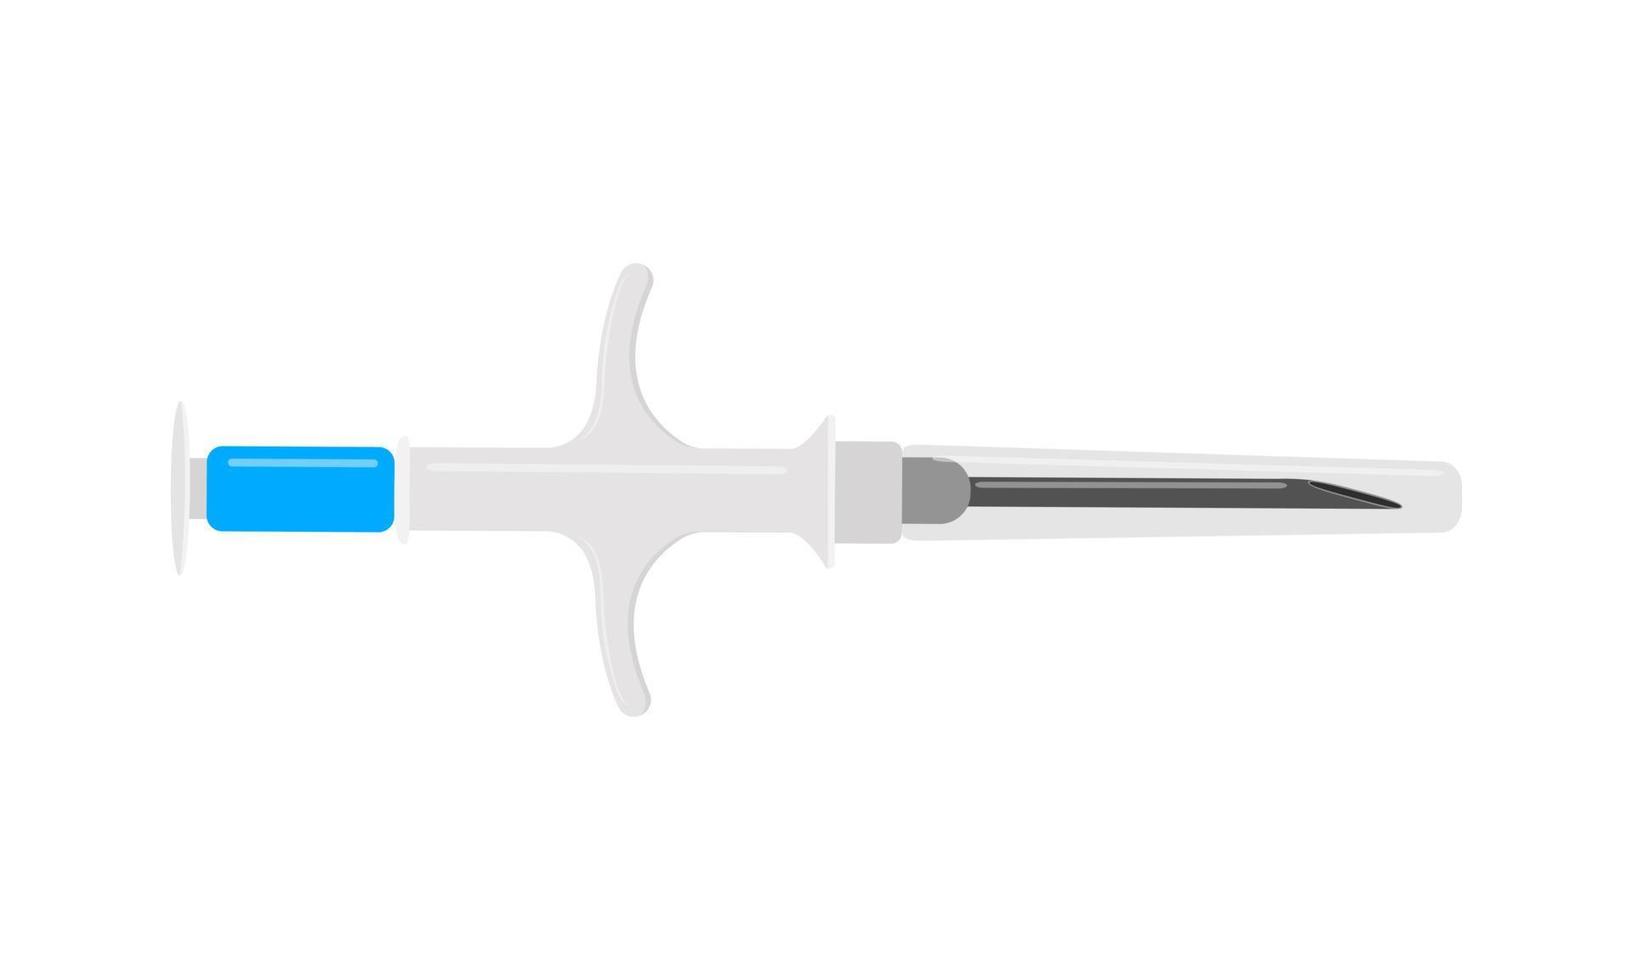 Syringe for pet microchipping. Veterinarian tool for dog or cat implant procedure. Concept of pets permanent ID vector